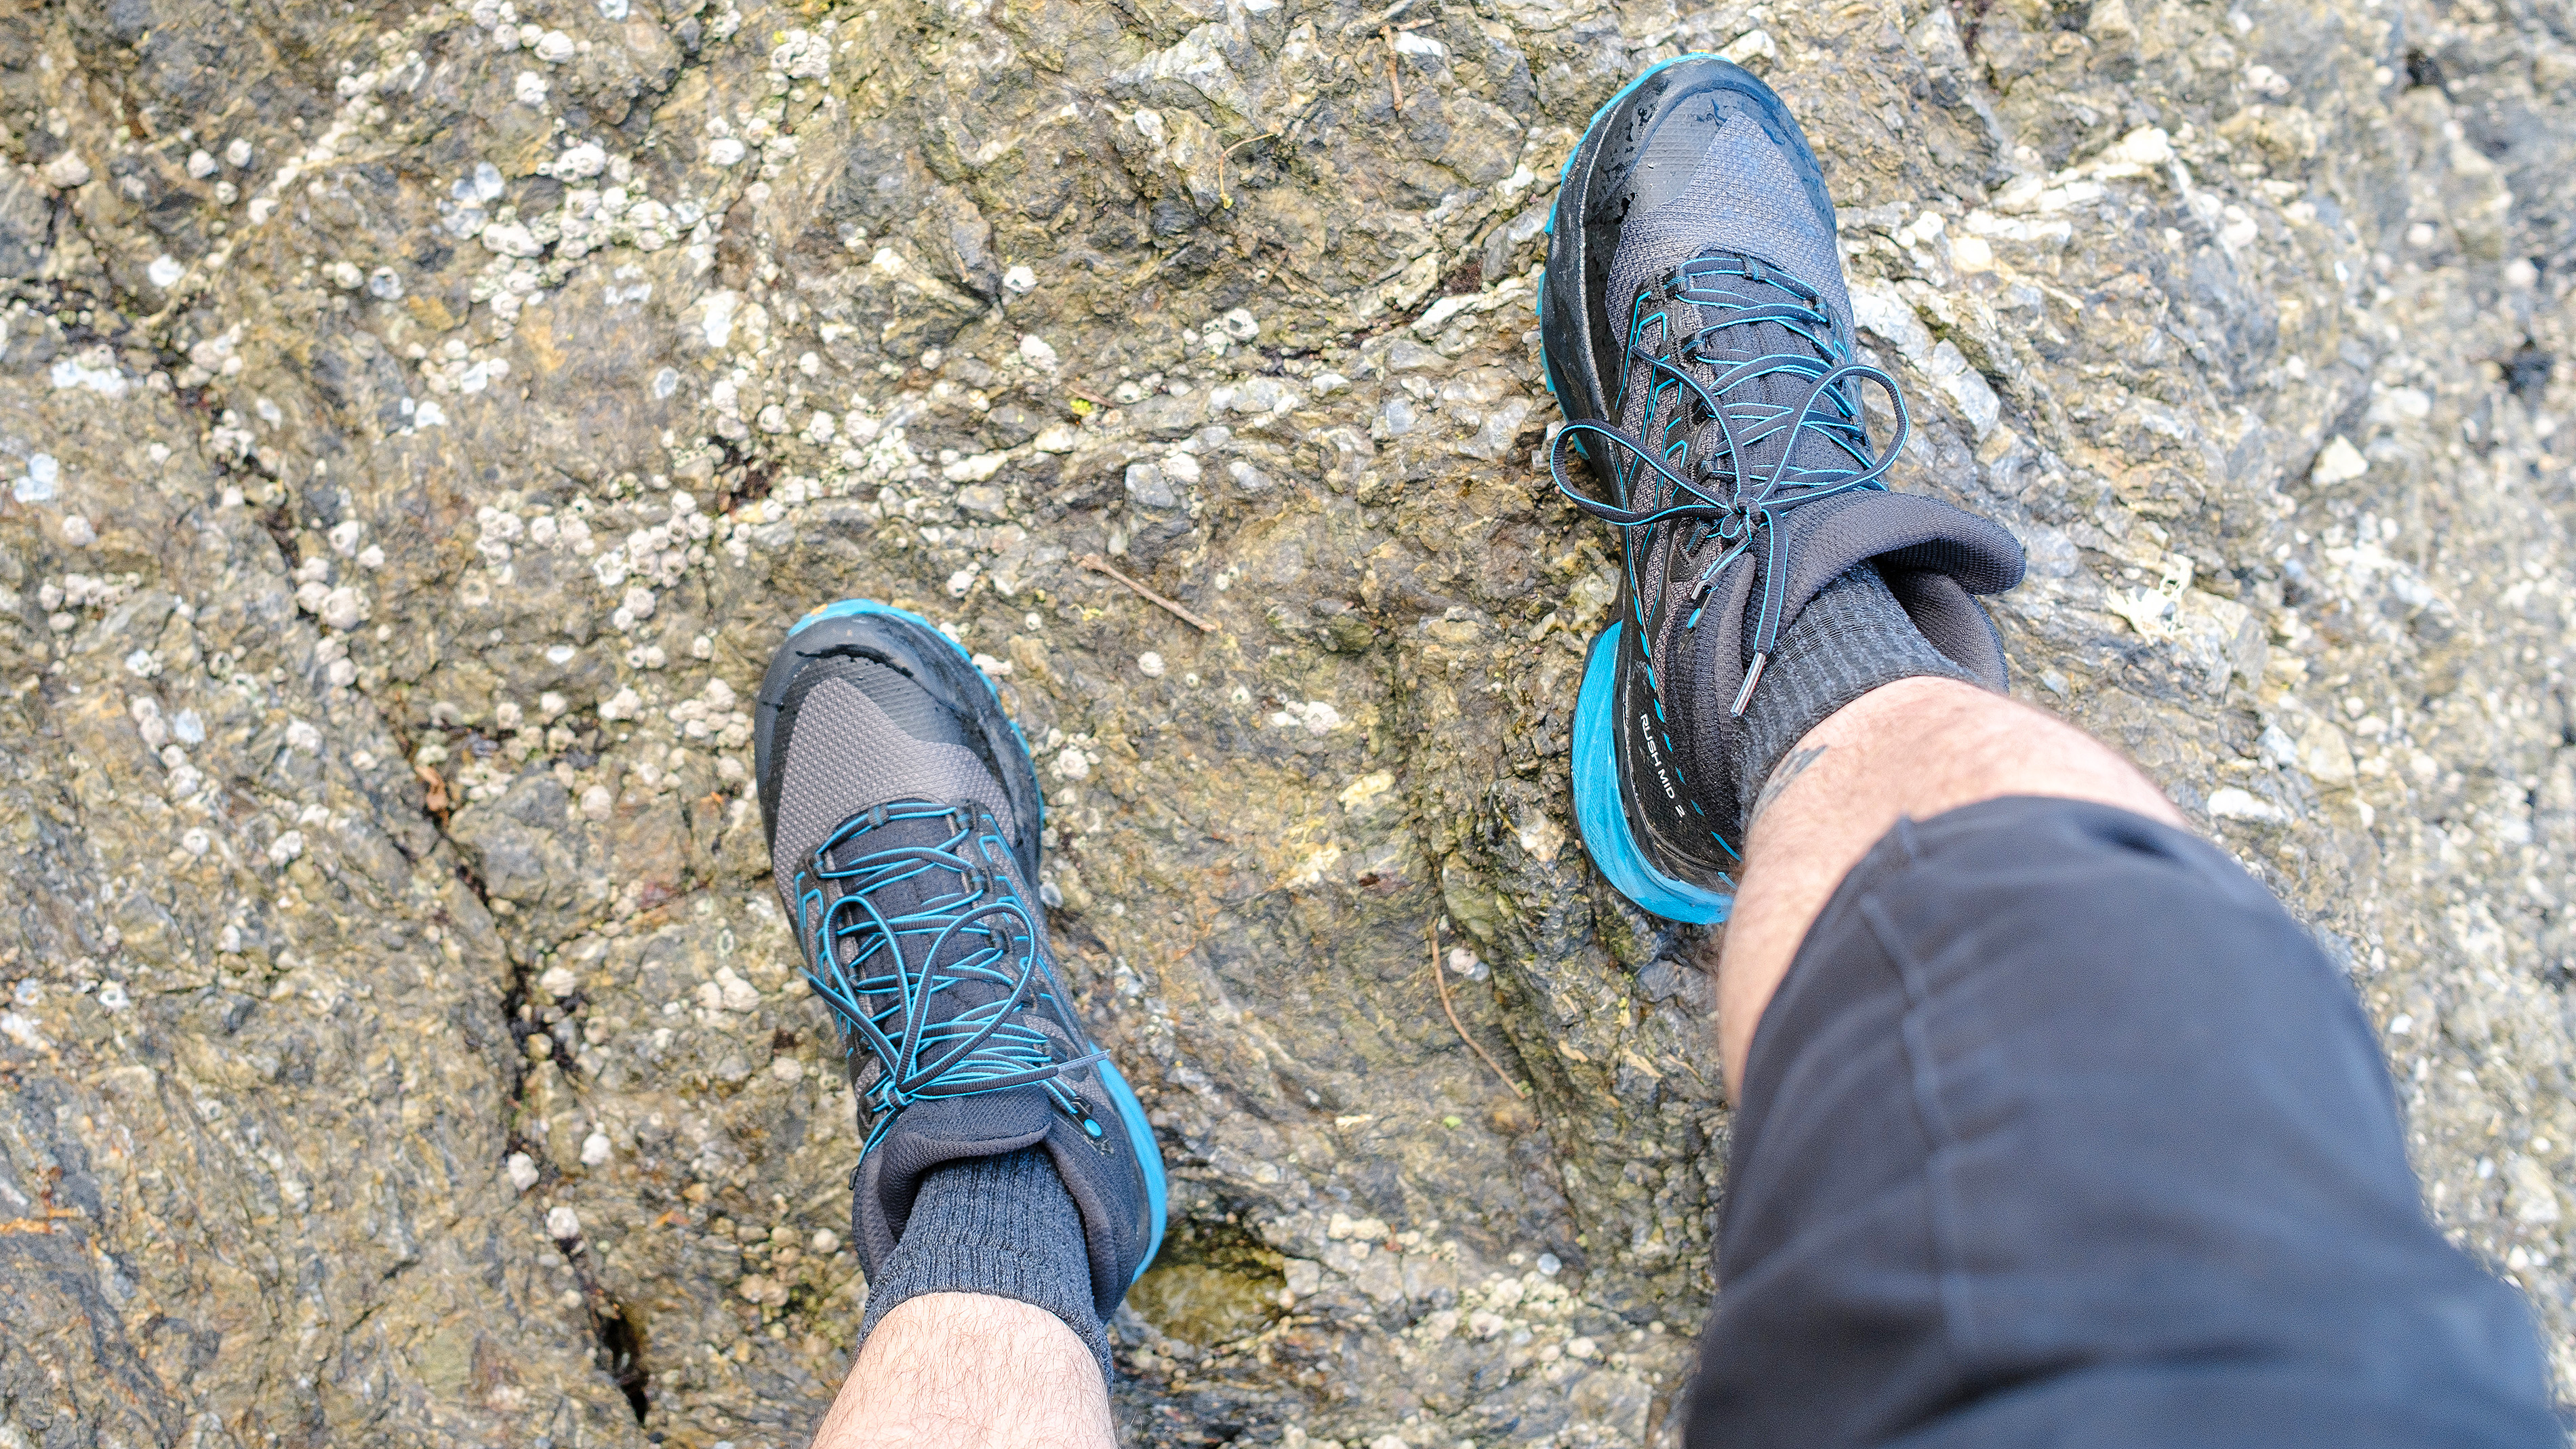 Scarpa Rush 2 Mid GTX hiking boots on a person's feet